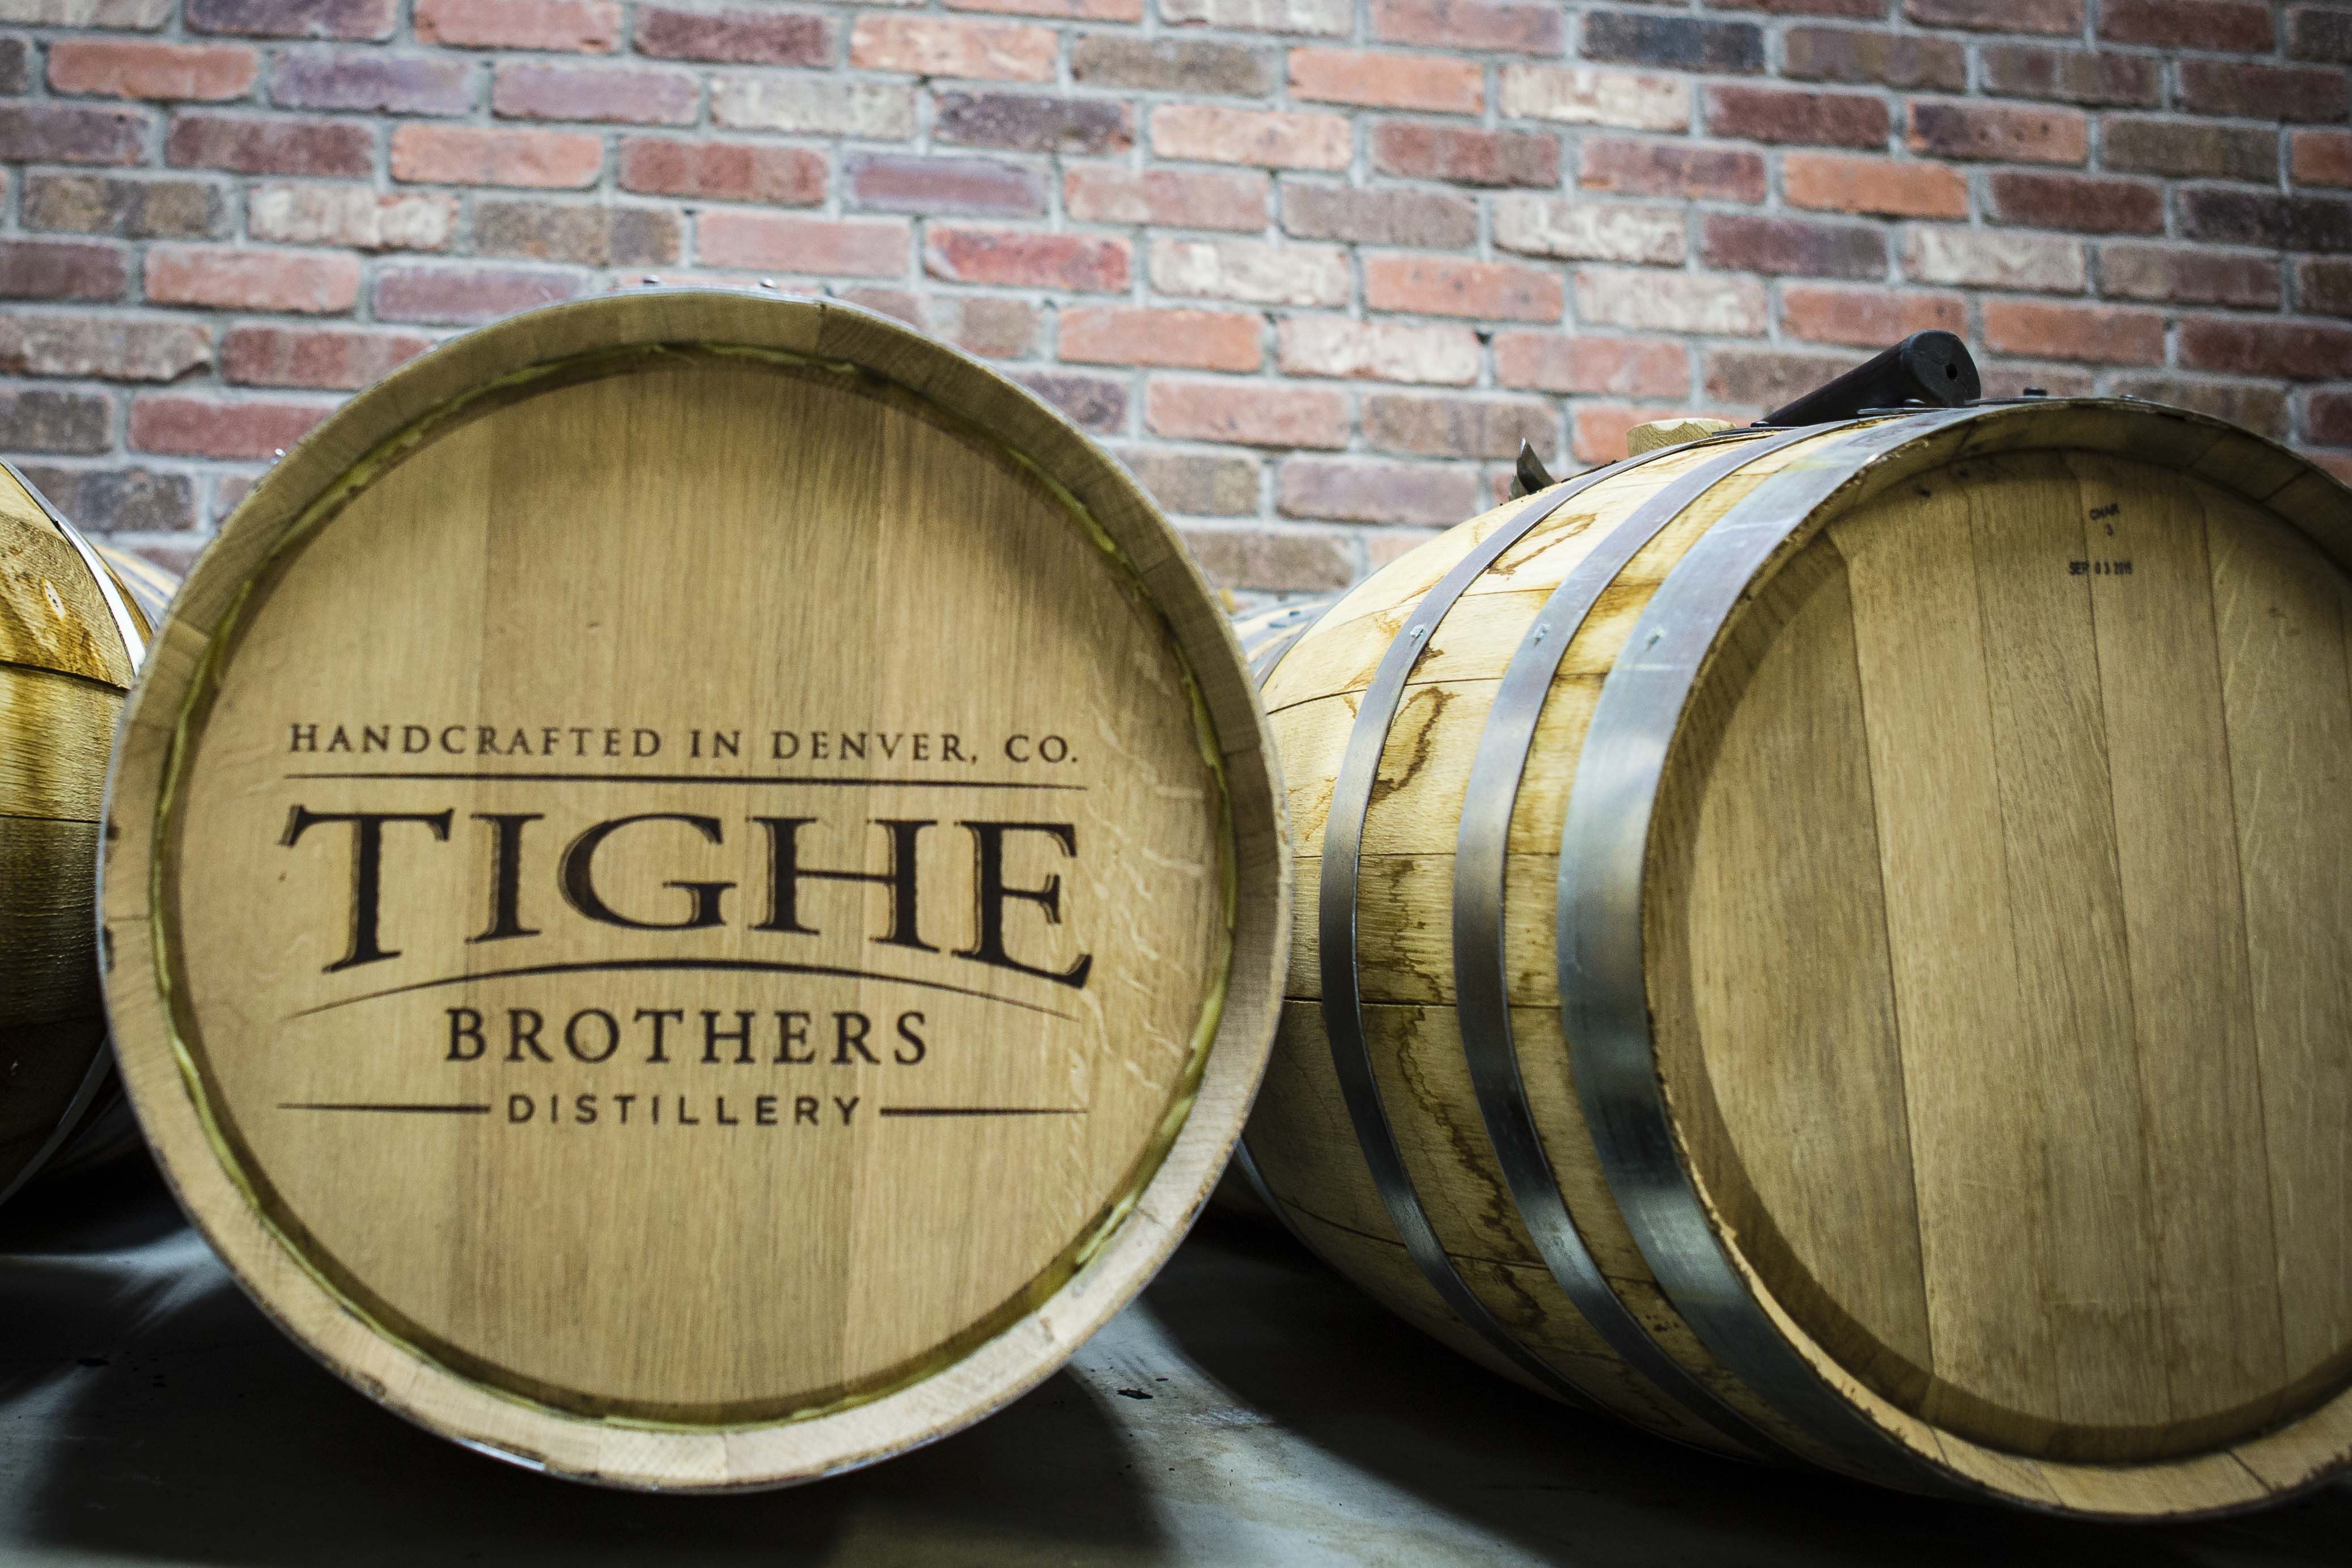 Tighe Brothers Distillery, Tighe Brothers, Whiskey Distillery, Park Hill, Local bar, Denver bar, Denver, Whiskey, Small Business, Katie Boudreau, Drinks, Bourbon, Brewery, Barrel Smoked Maple Syrup. Old Fashion,